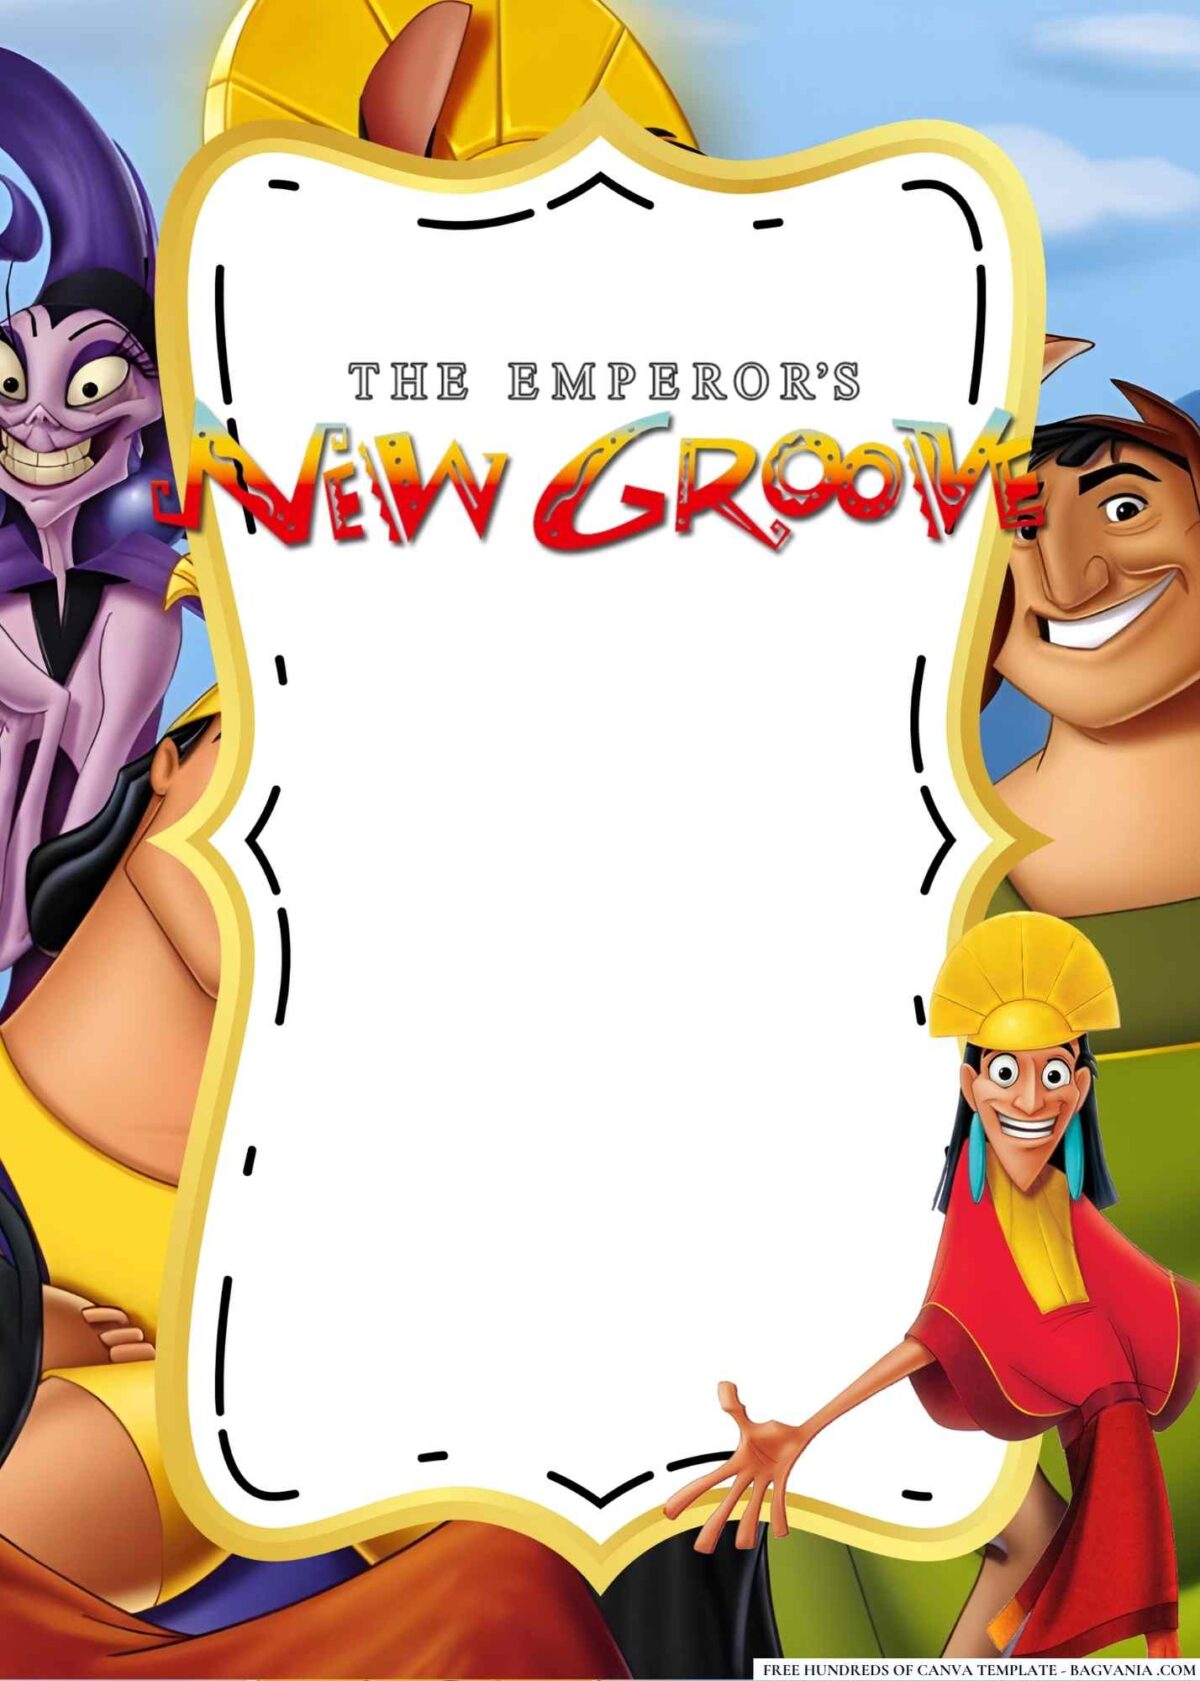 FREE Editable Emperor's New Groove Baby Shower Invitation 